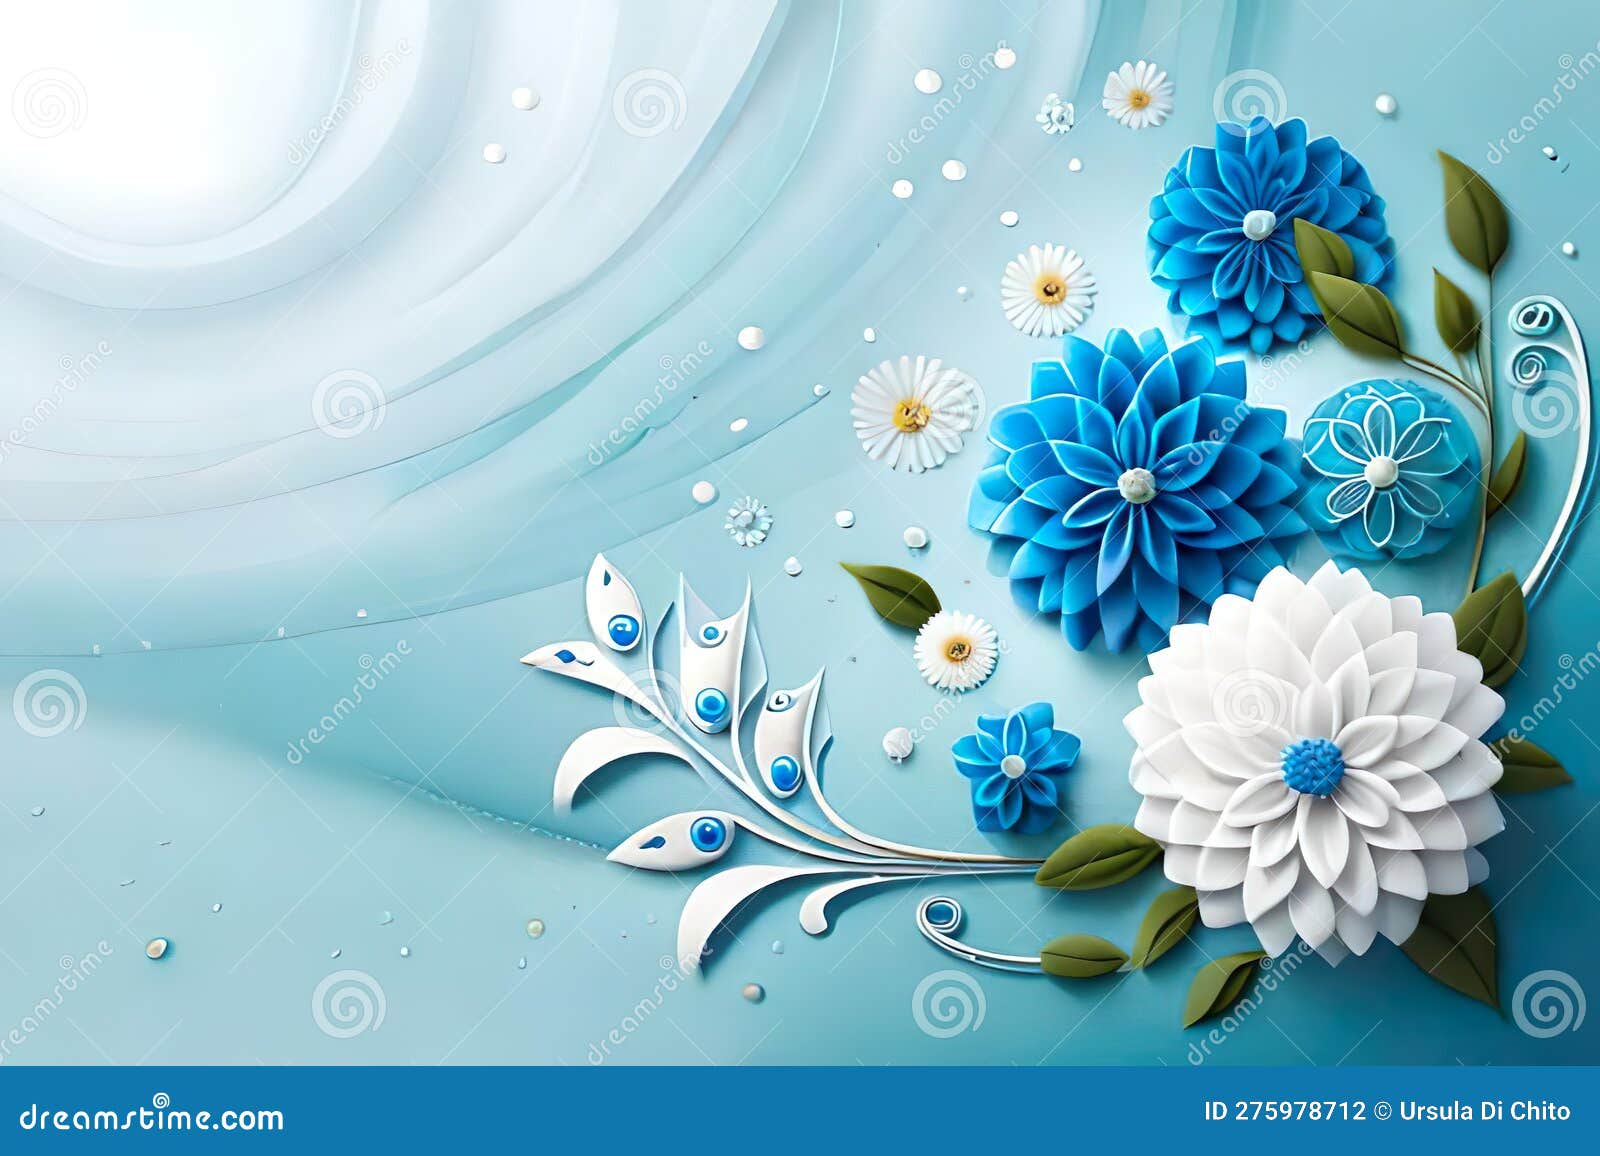 beautyful blue and white flowers on a frame - card for gratulations